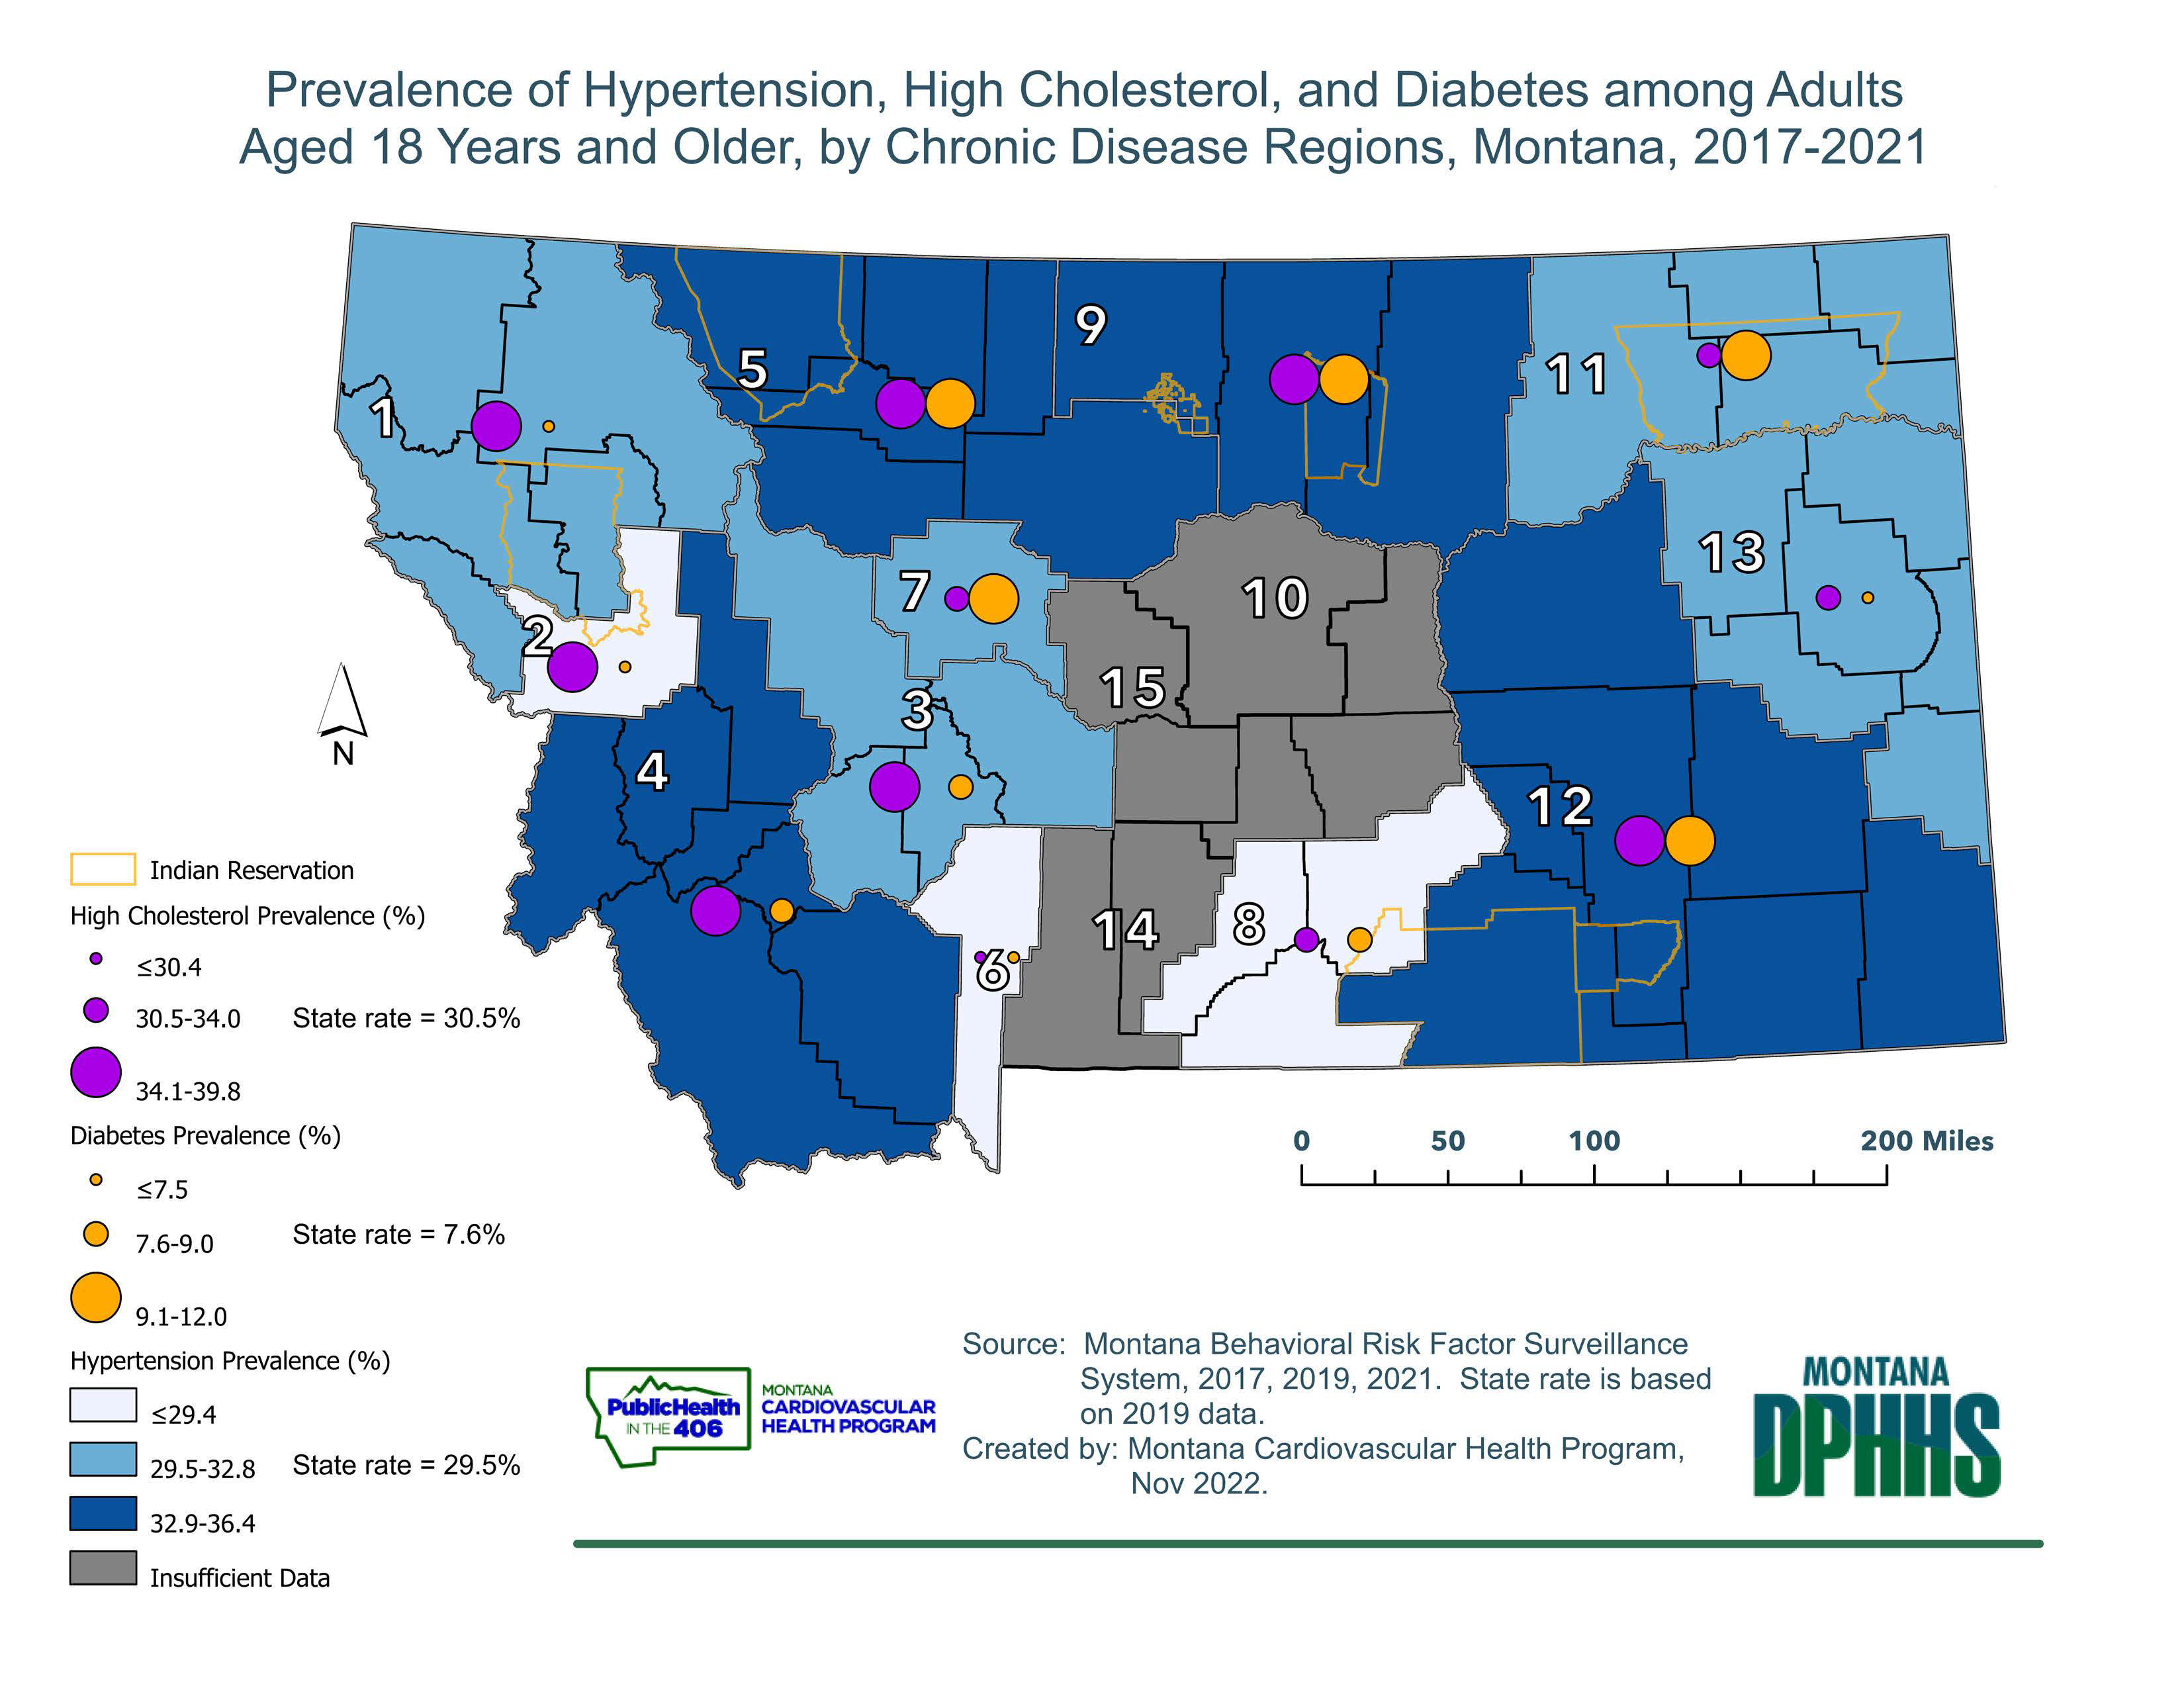 Prevalence of hypertension, high cholesterol, and diabetes amount adults aged 18 years and older, by chronic regions, in Montana 2017-2021.